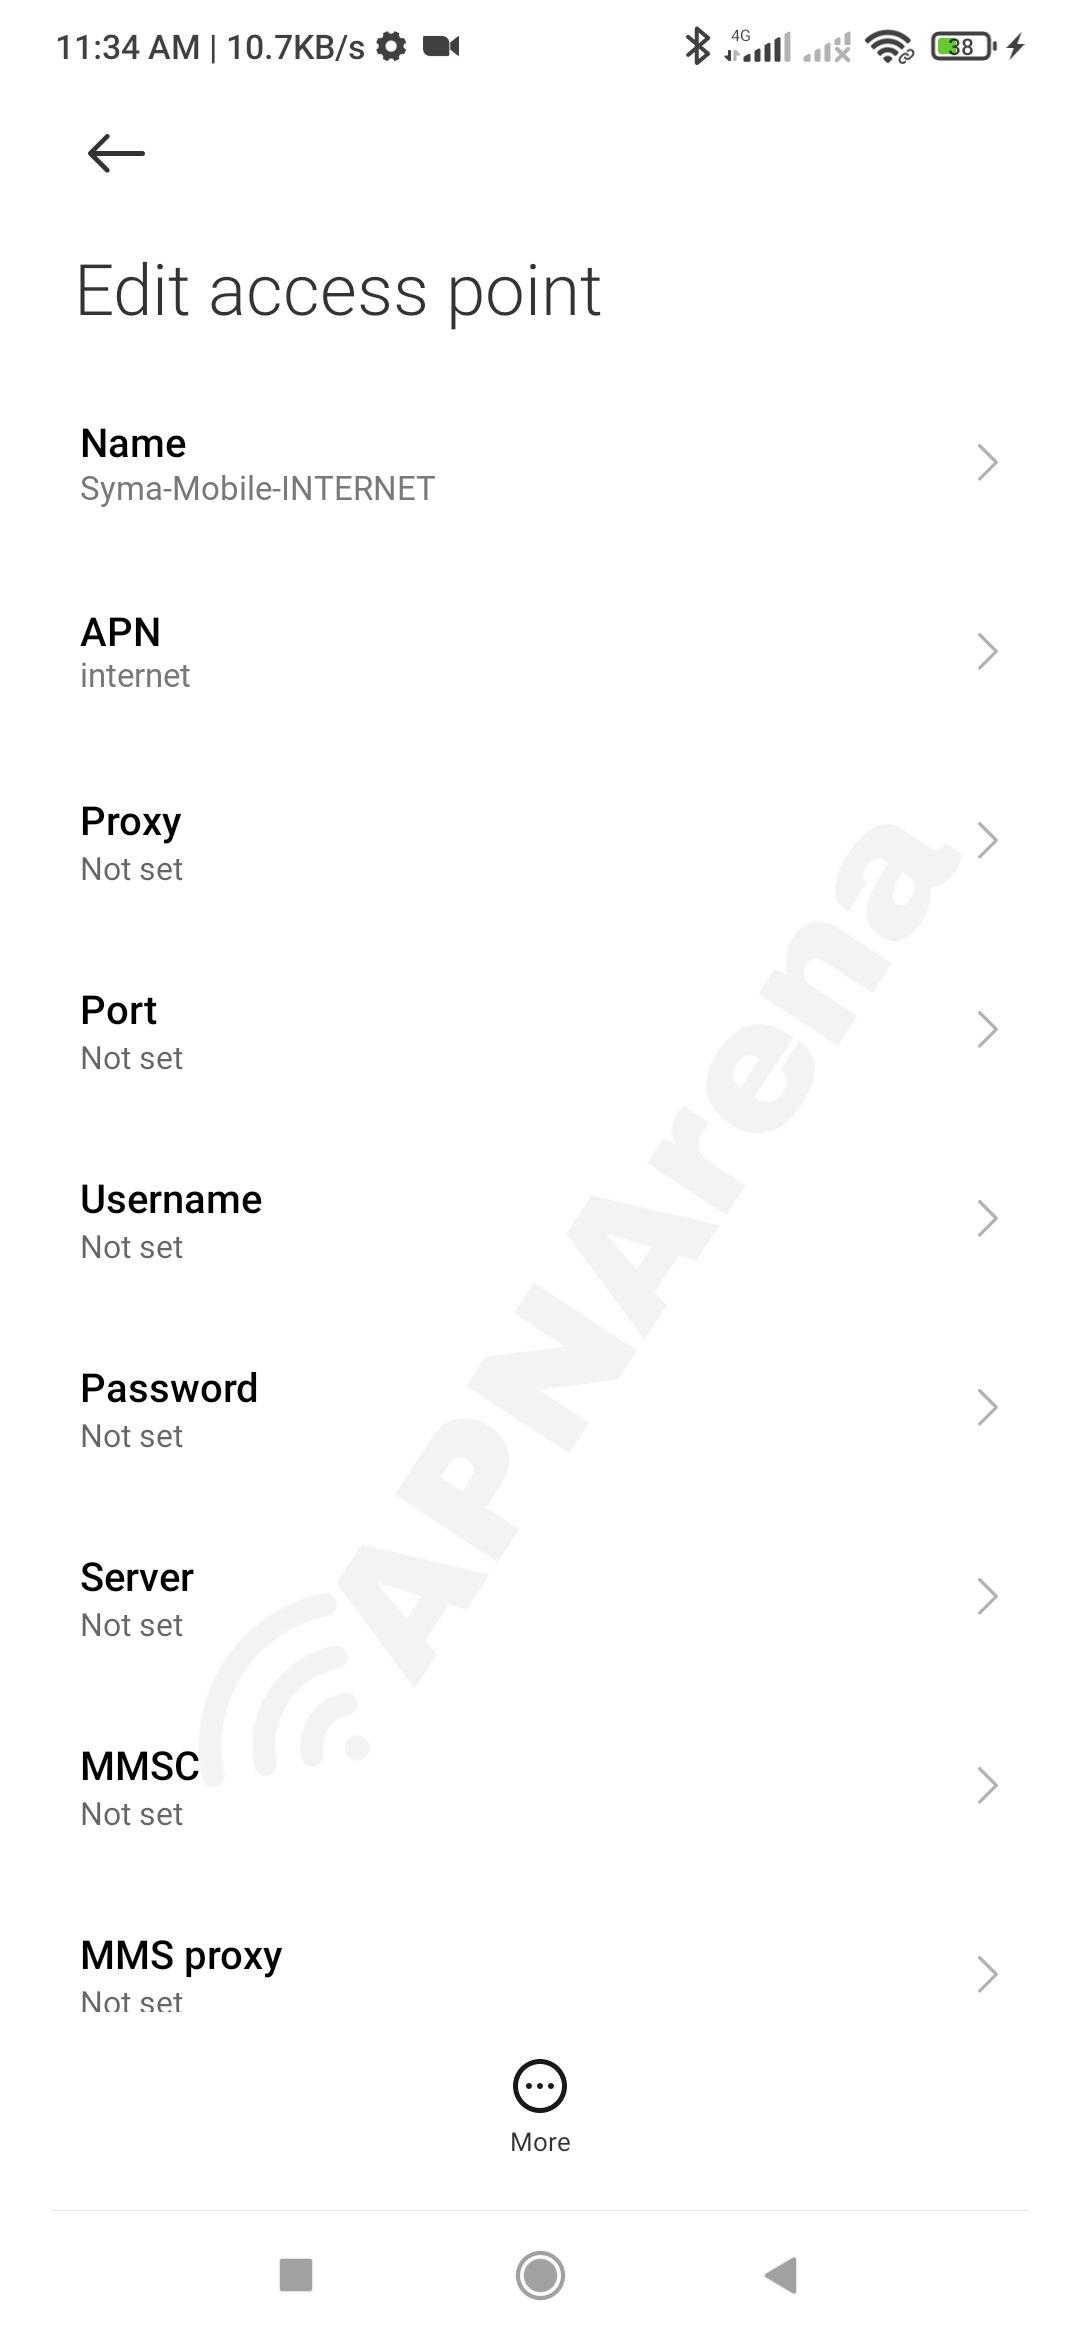 Syma mobile APN Settings for Android